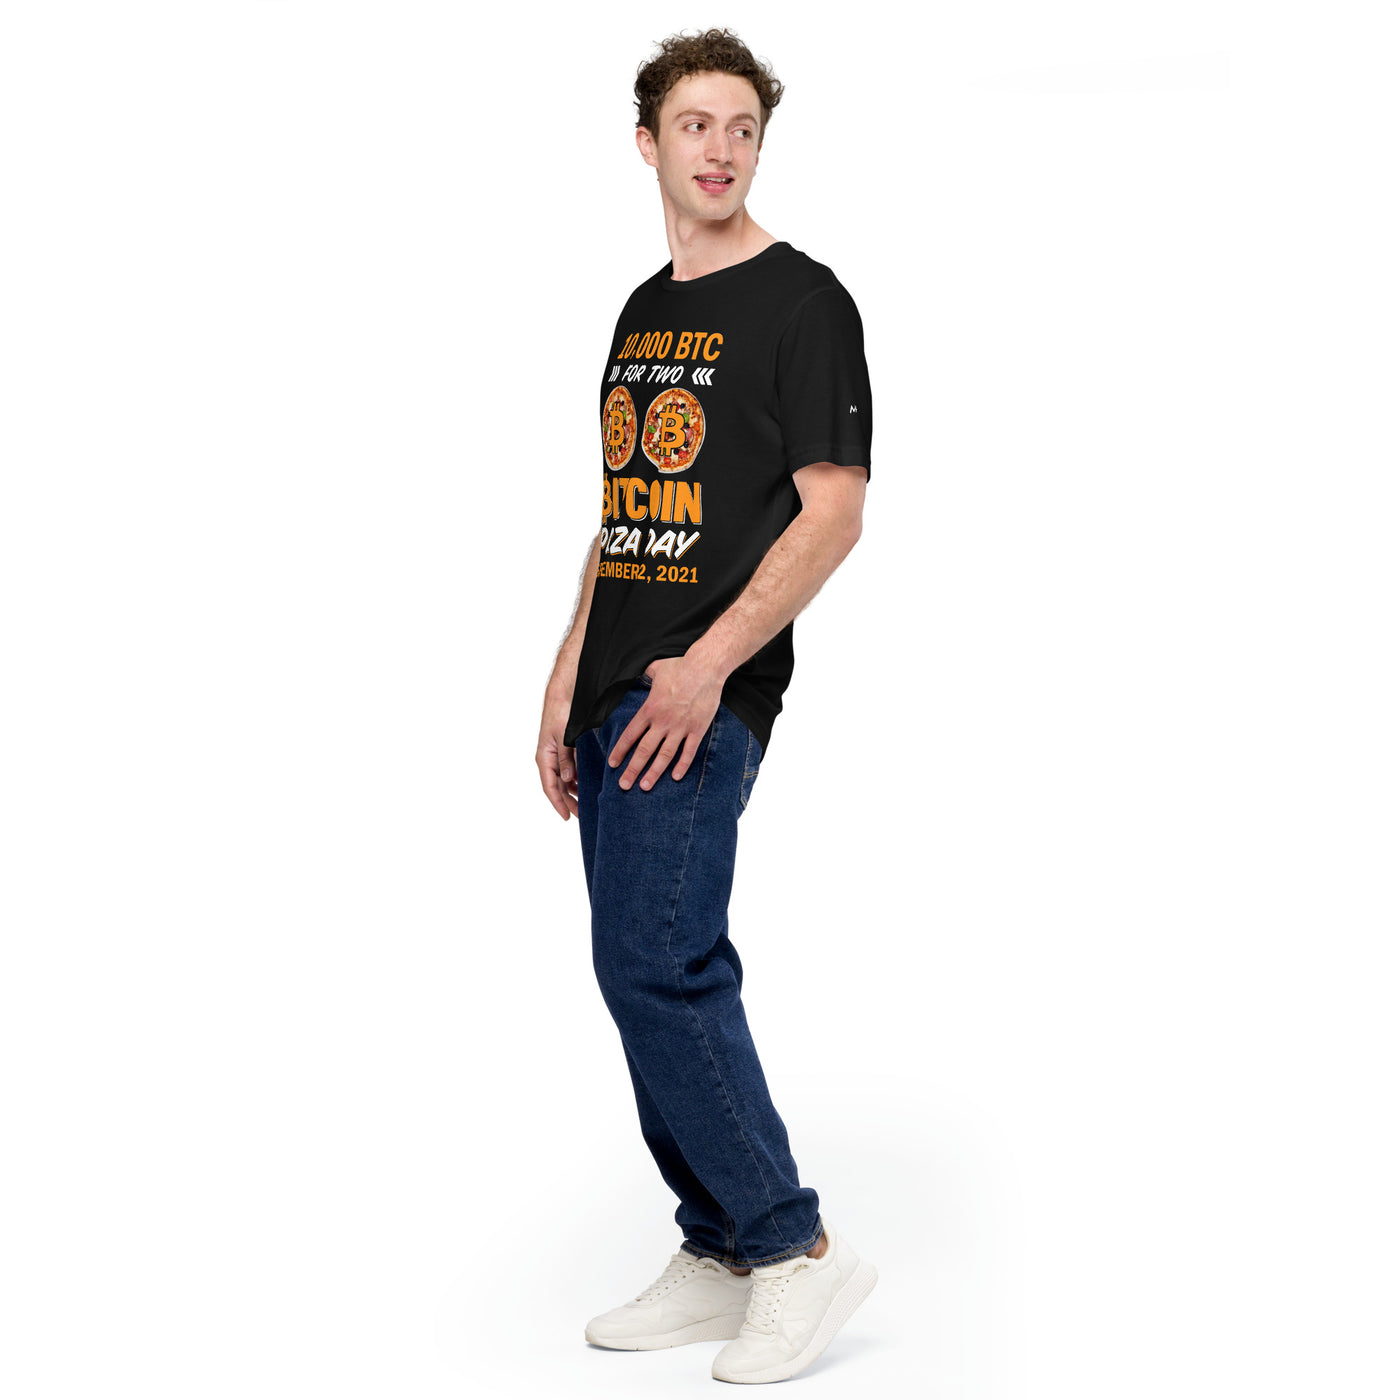 Bitcoin Pizza Day Special September 22, 2021, 10,000 BTC for two B-pizzas Unisex t-shirt